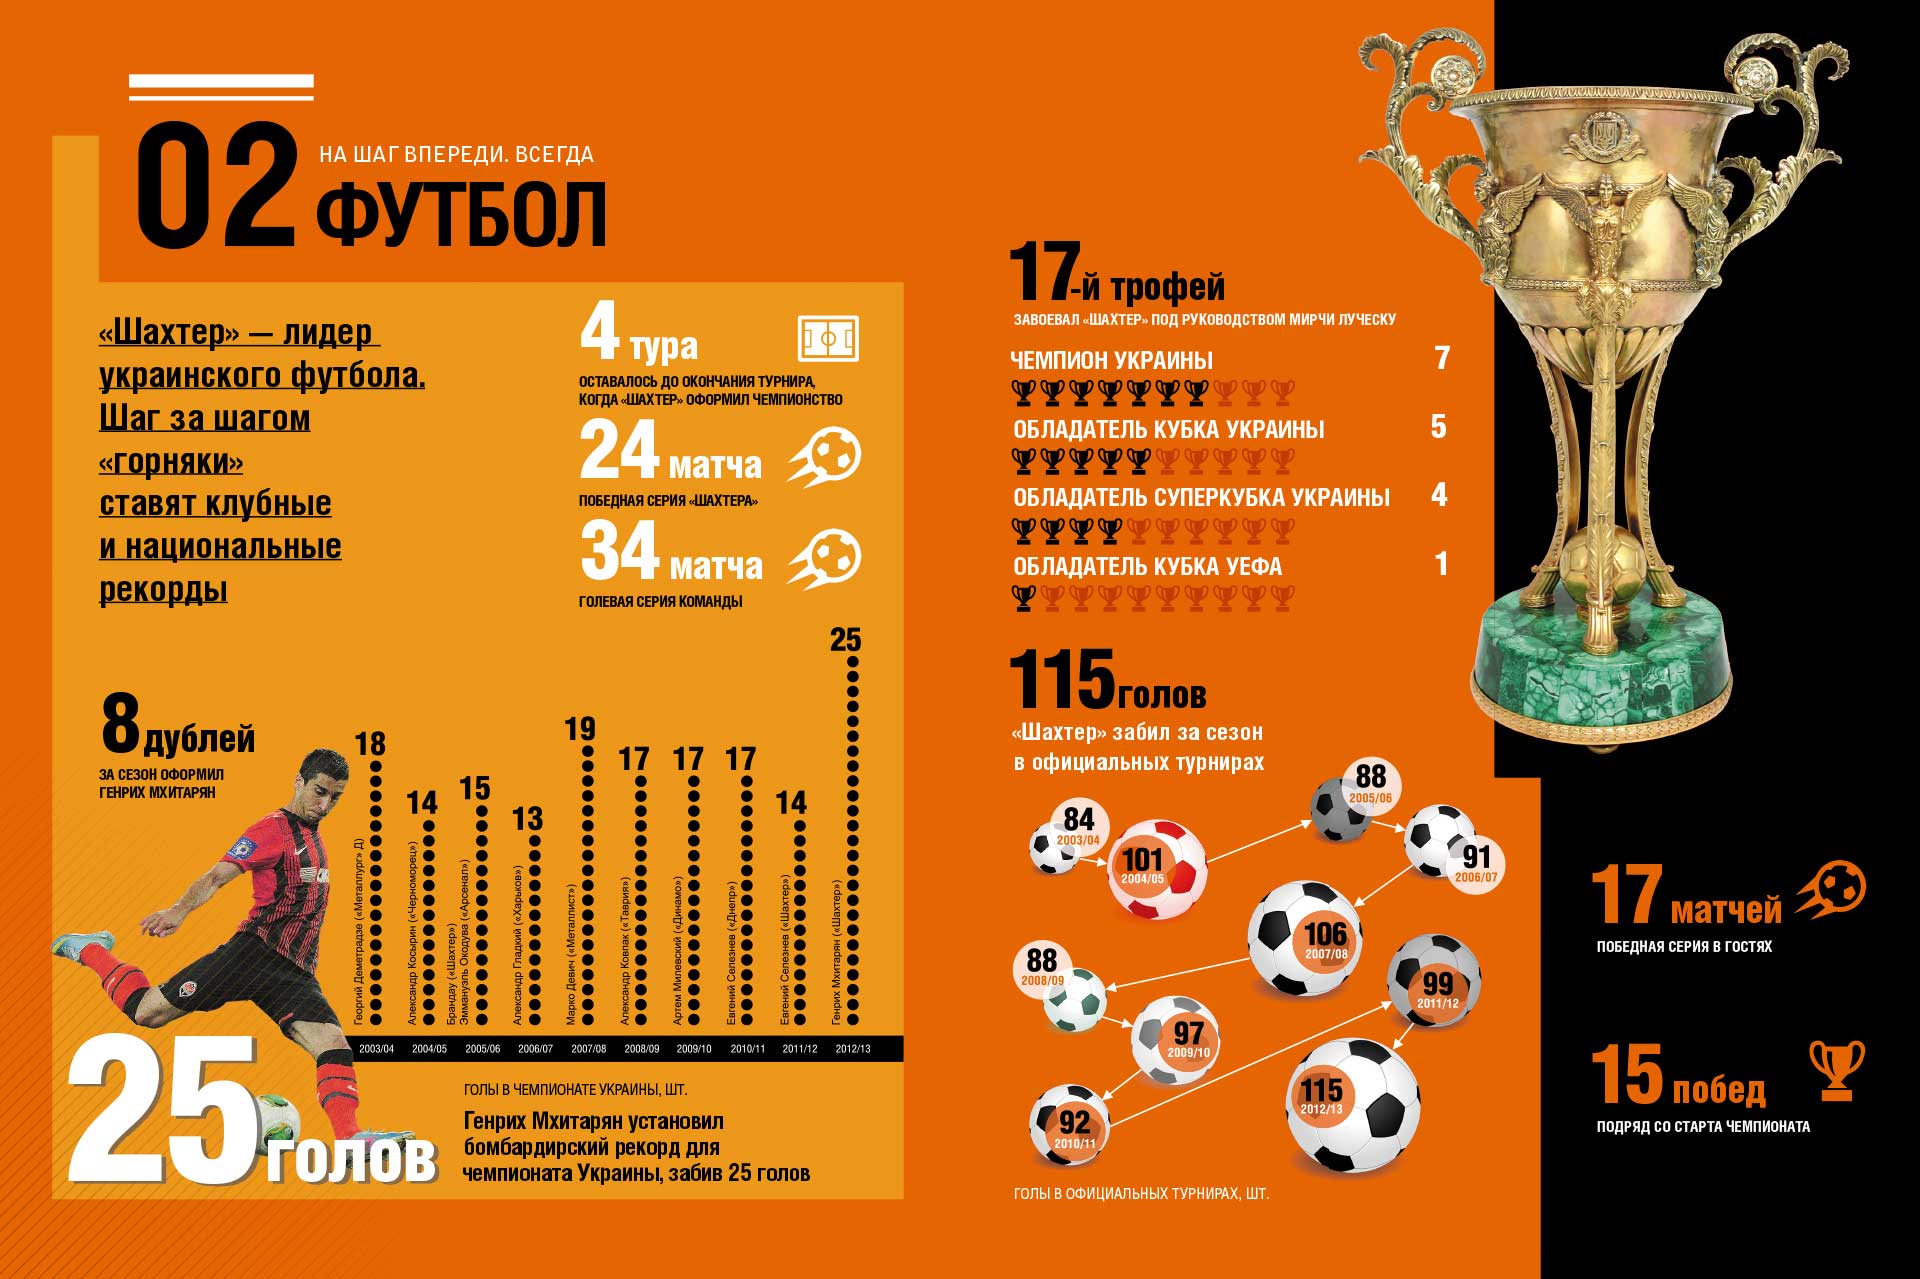 Annual Report, FC Shakhtar